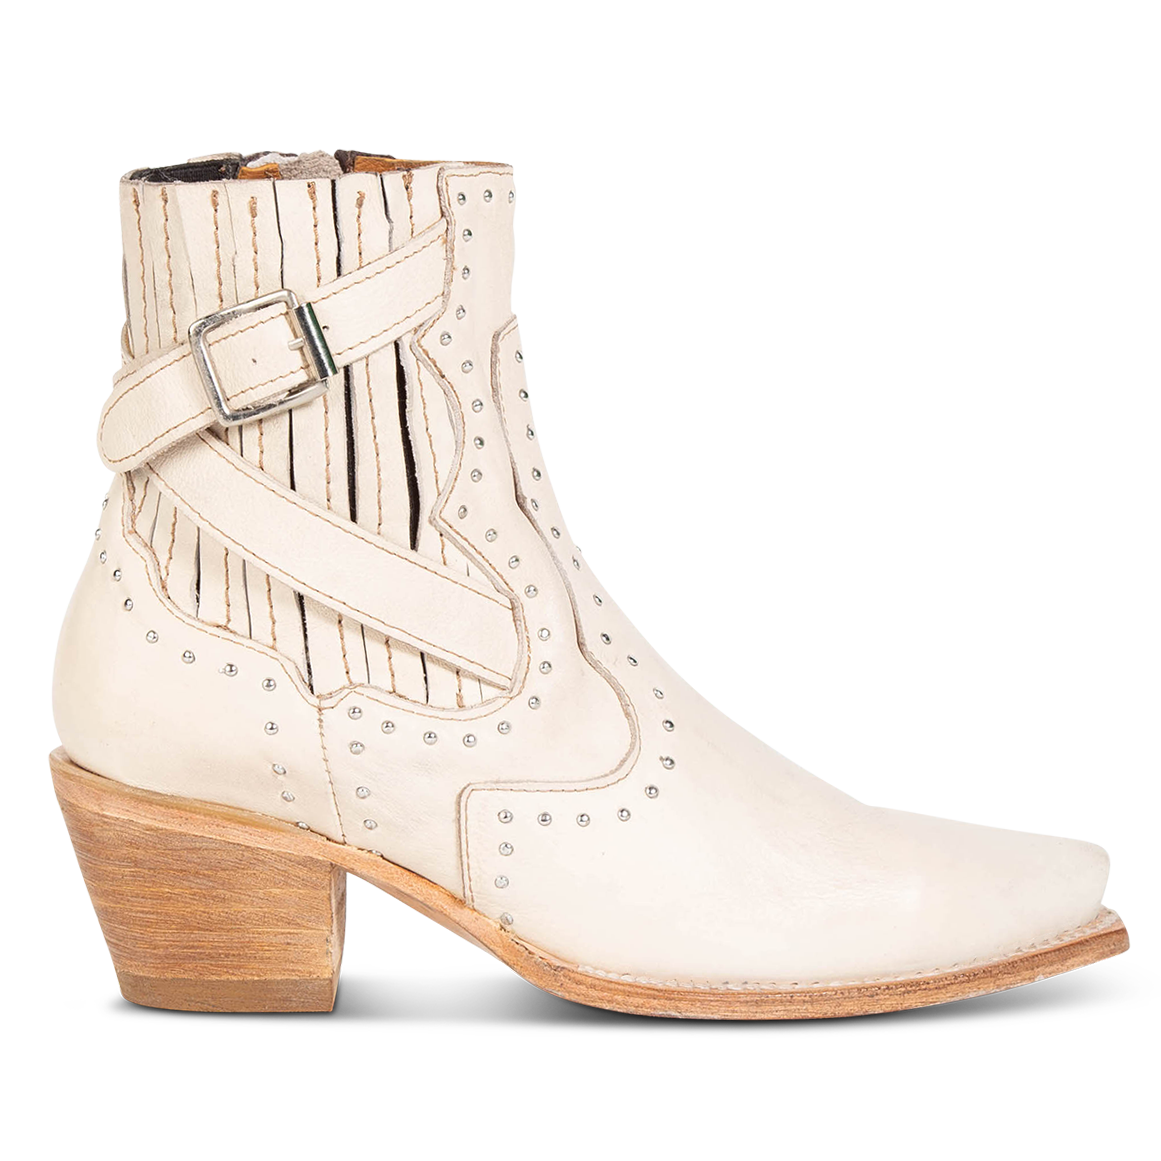 FREEBIRD women's Morgan beige leather ankle bootie with silver stud embellishments, gore detailing, and buckle straps